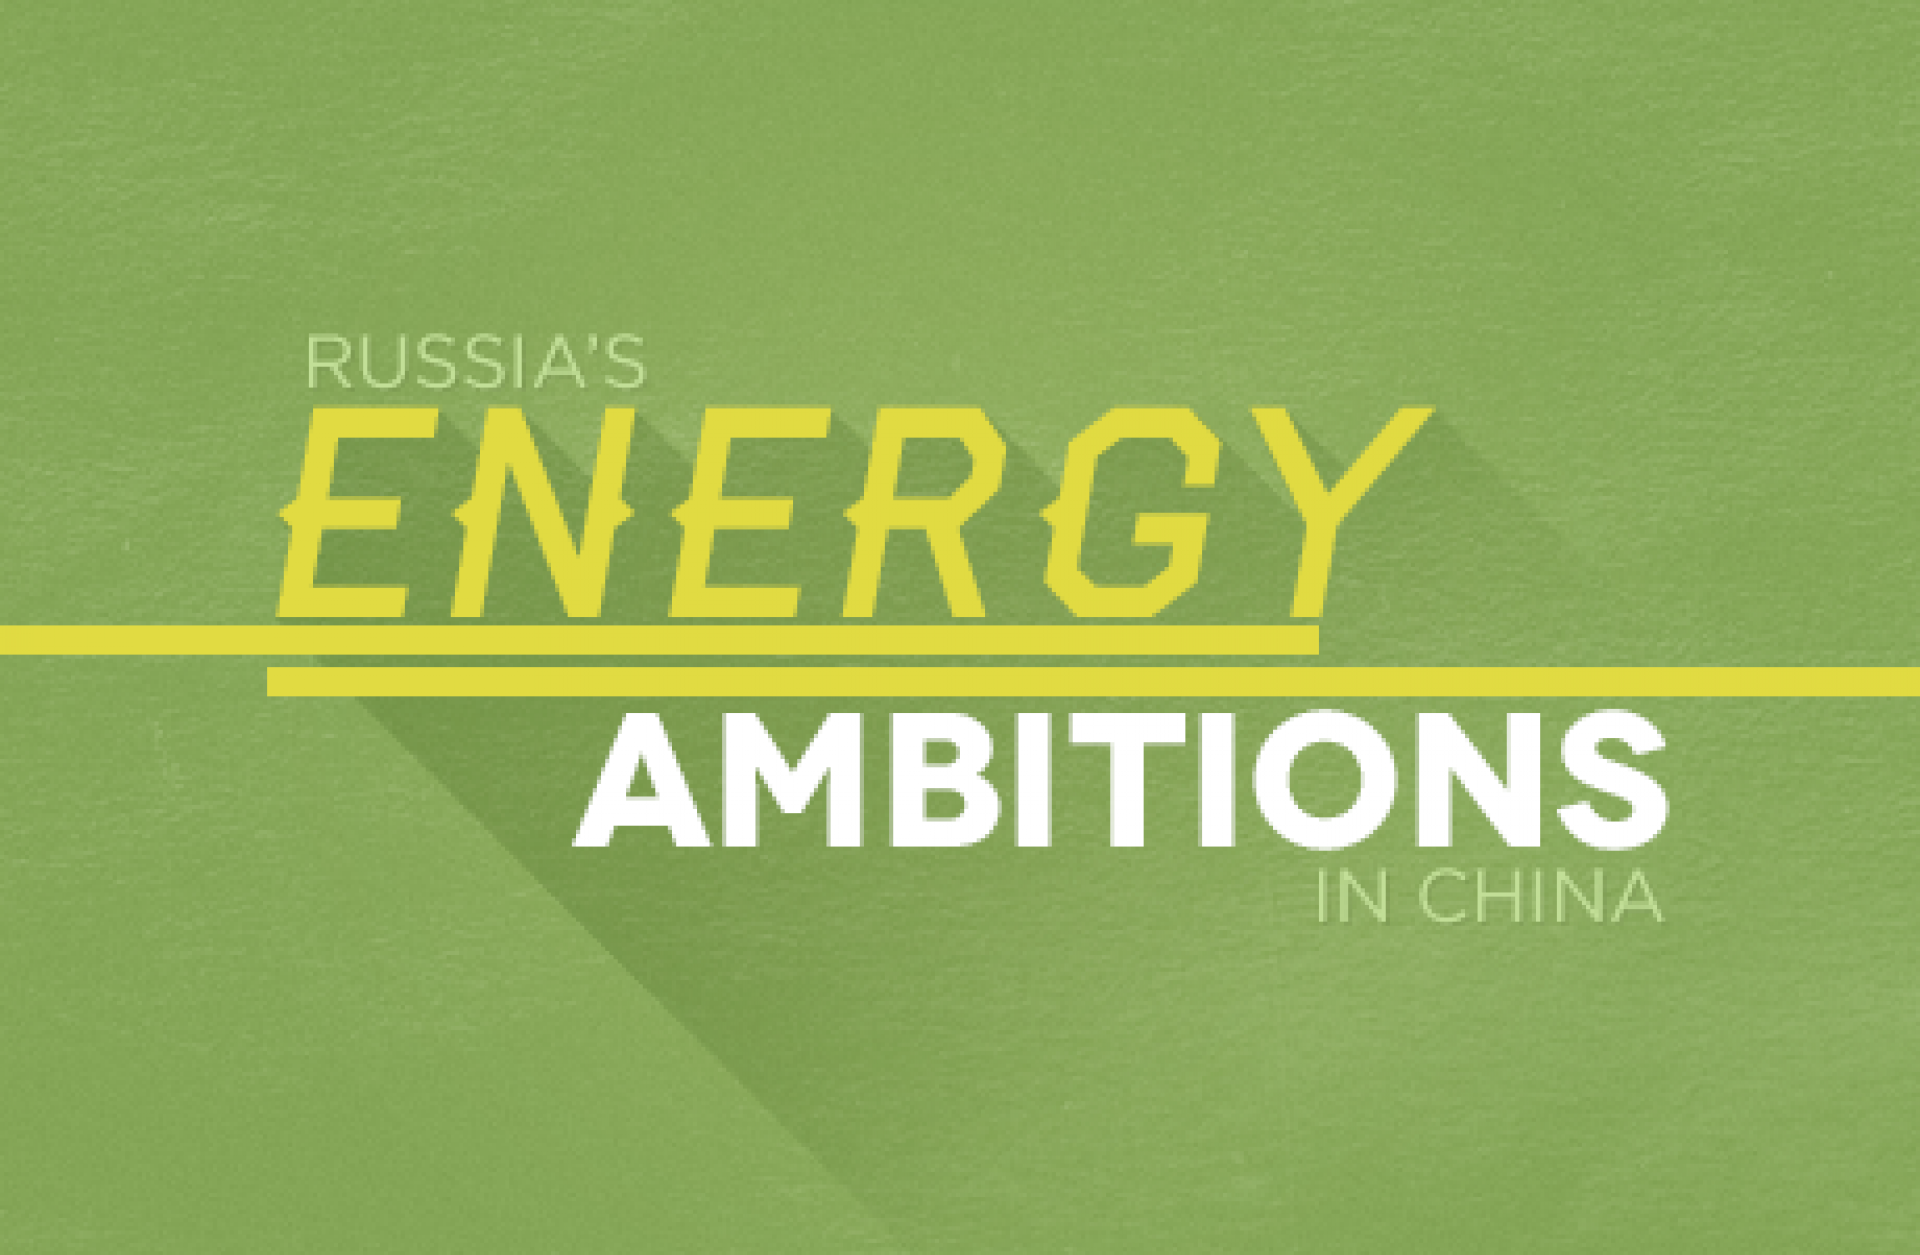 Russia's Energy Ambitions in China